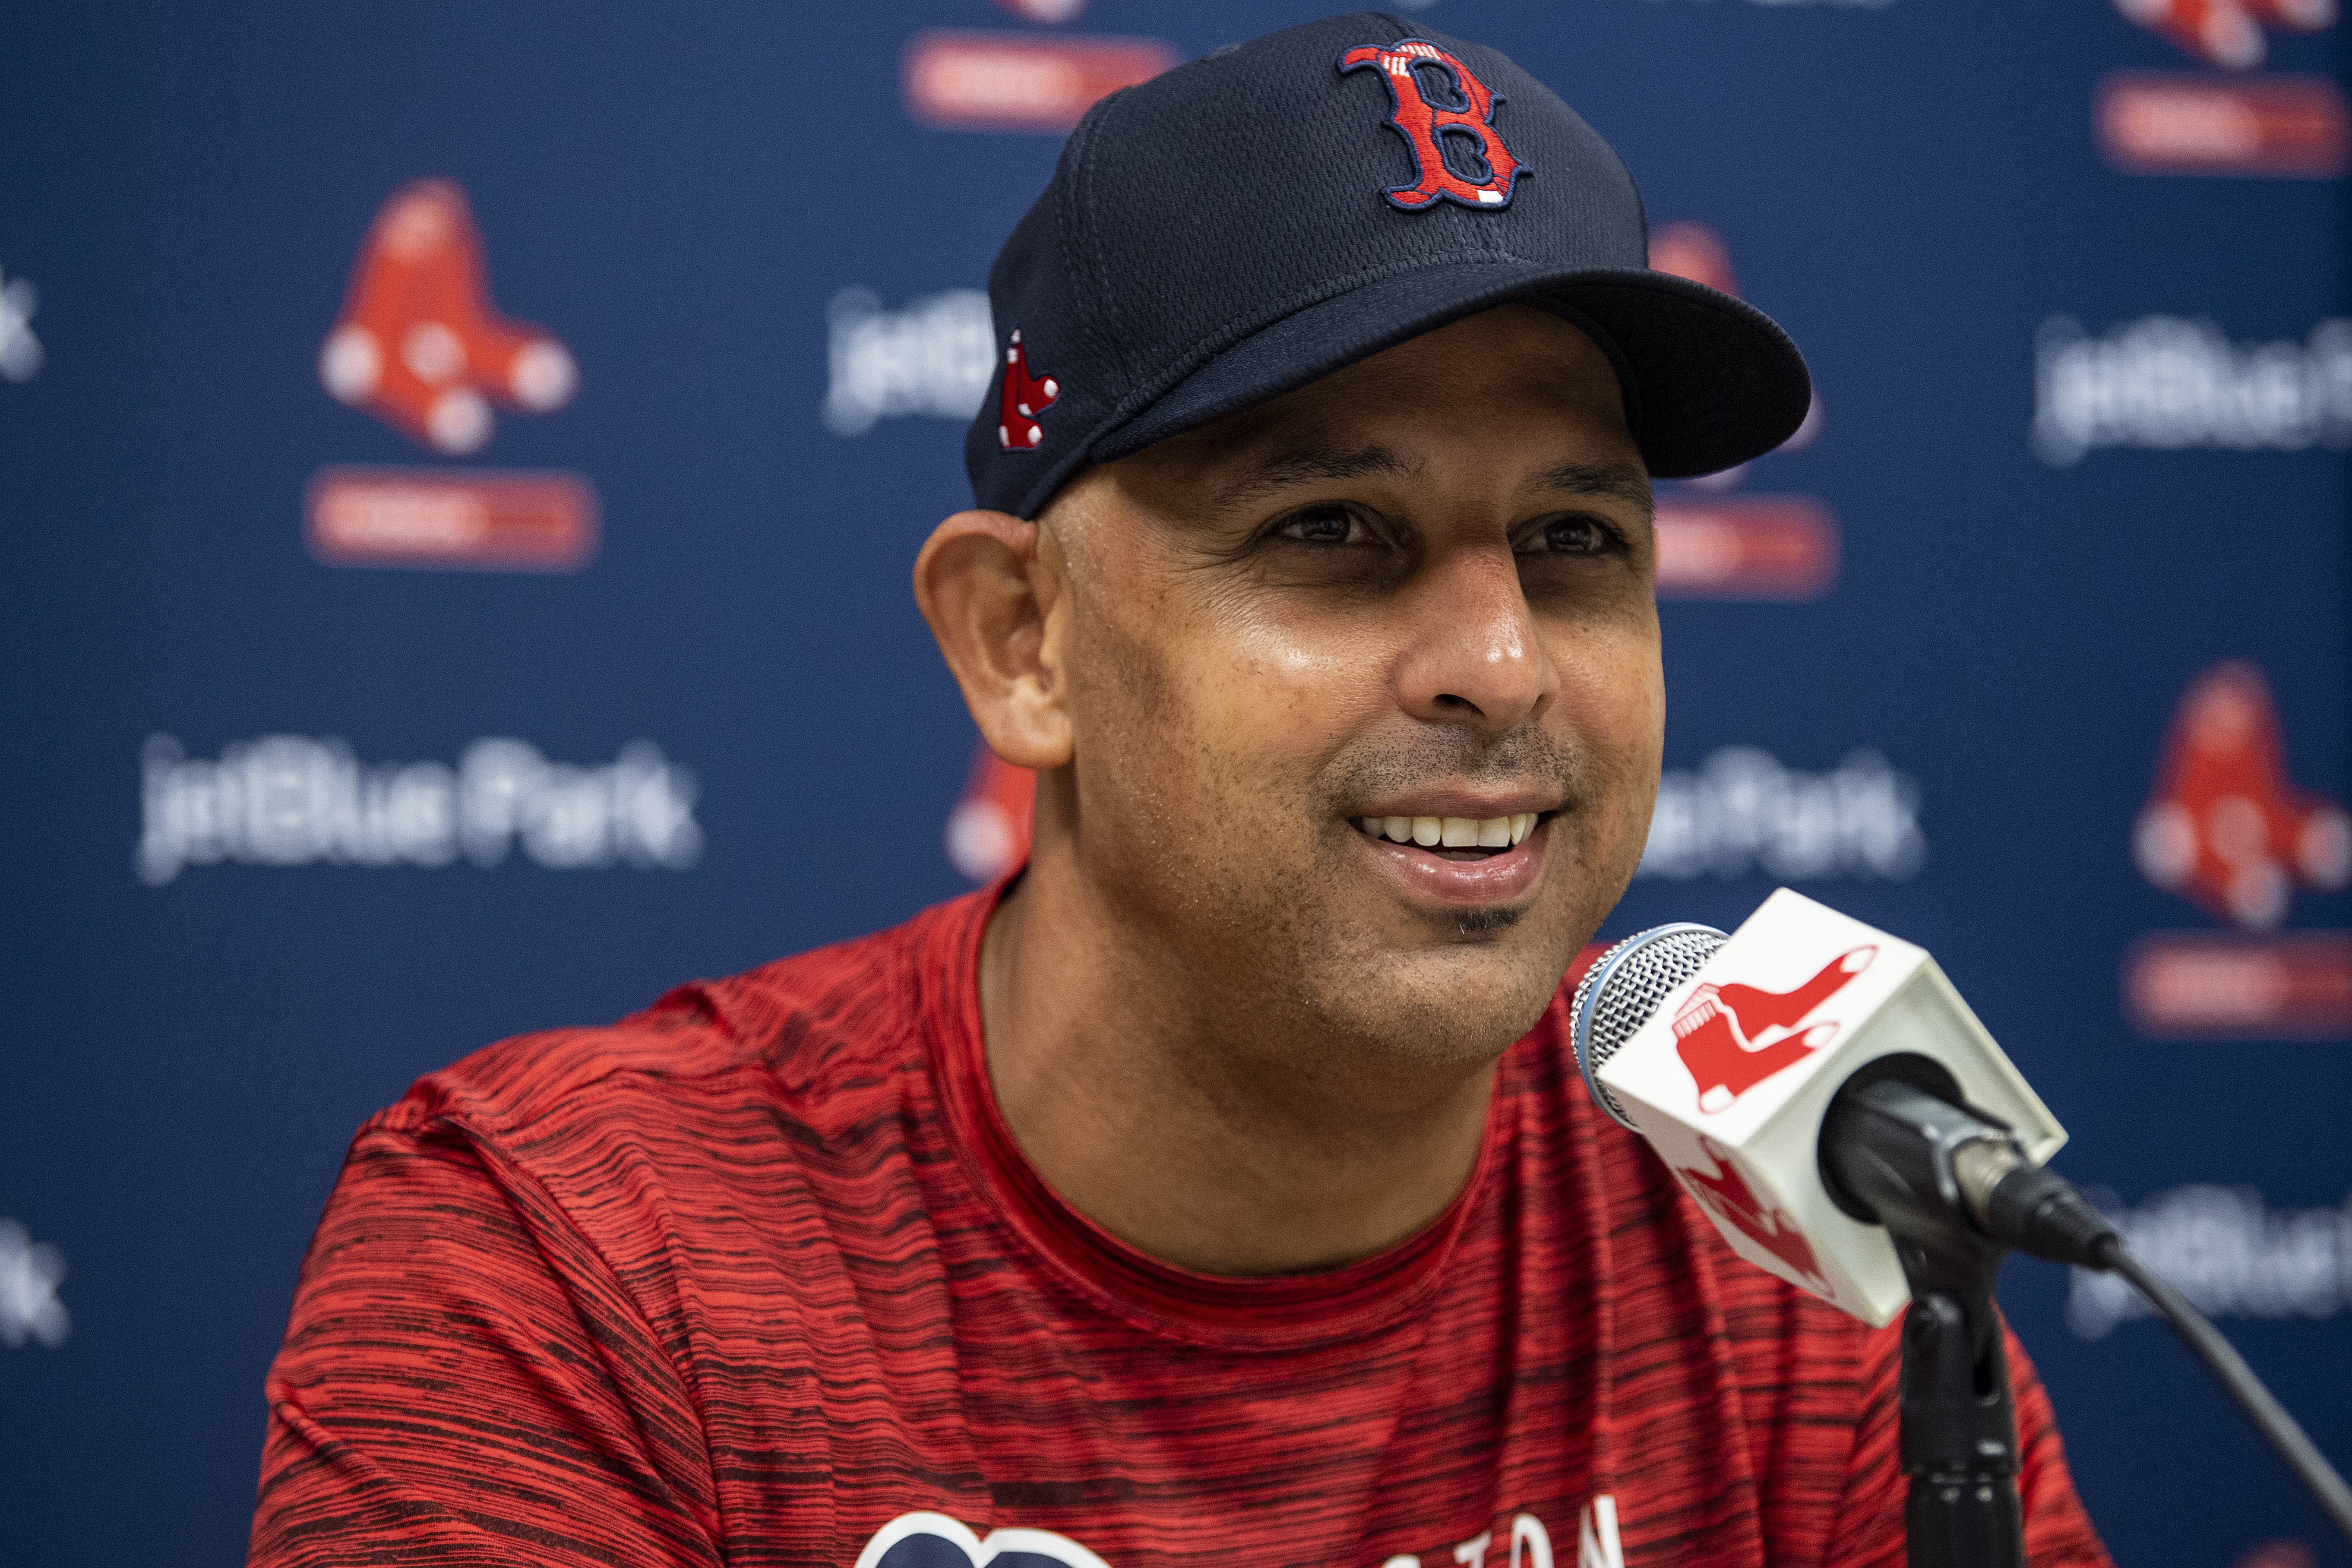 That's something that intrigues me.' Front office role interests Red Sox  manager Alex Cora, but not now - The Boston Globe